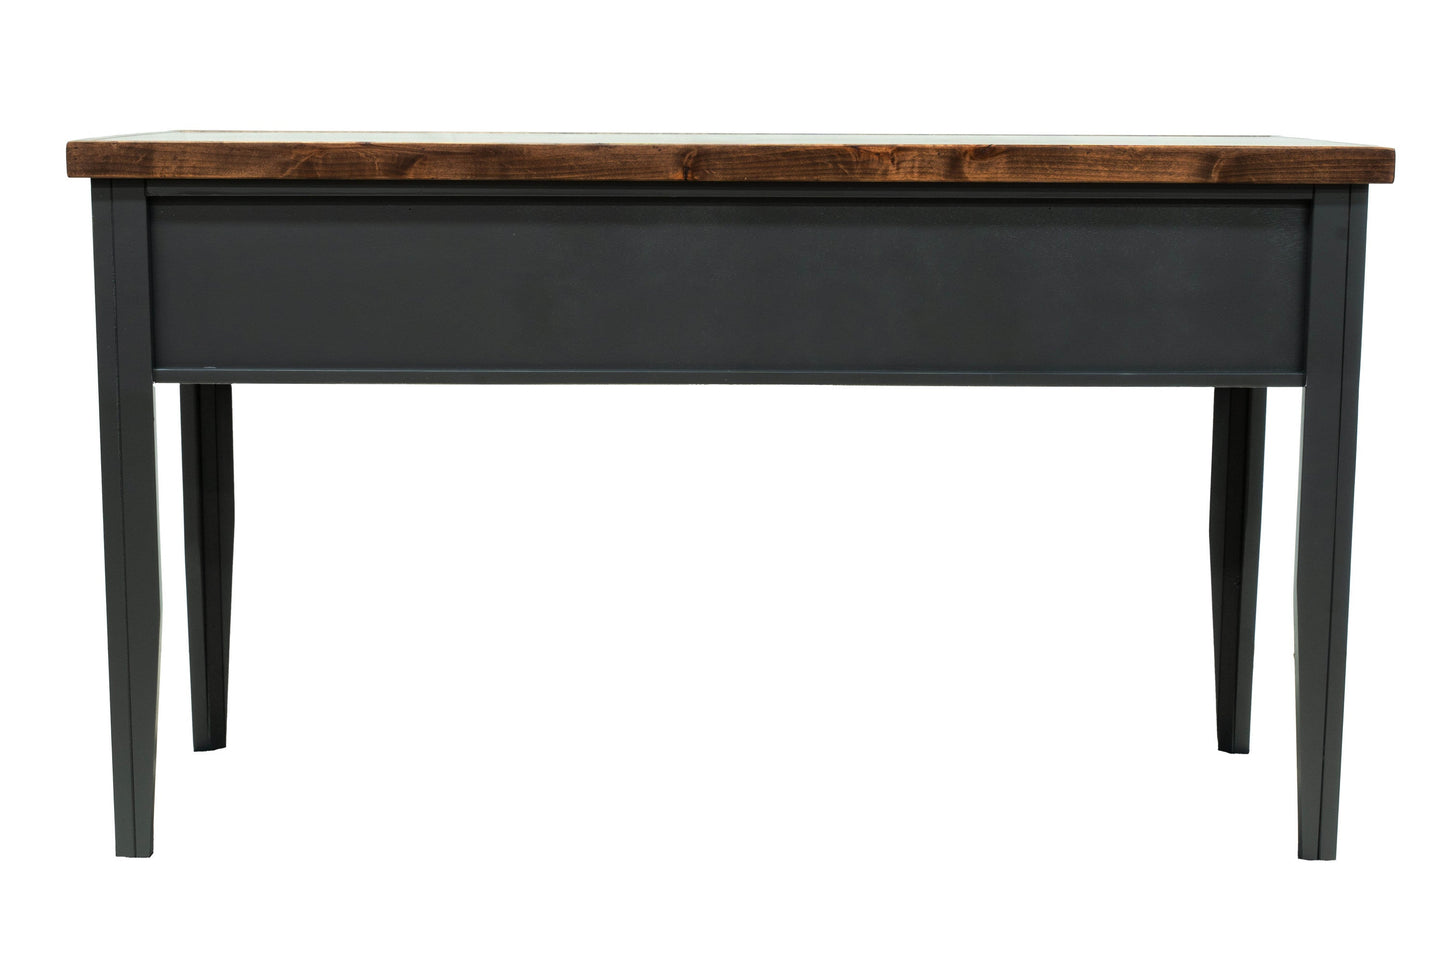 Bridgevine Home Essex 53 inch Writing Desk, No Assembly Required,  Black and Whiskey Finish